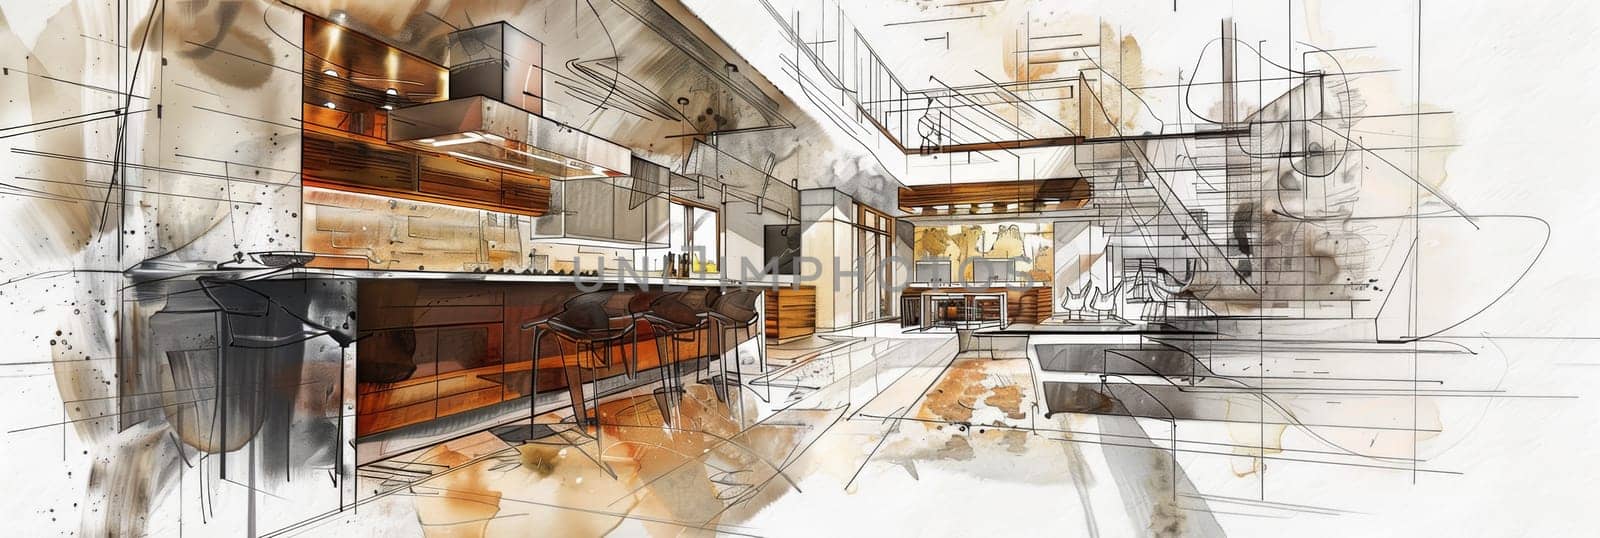 A vibrant drawing showcasing a spacious kitchen with ample counter space, ideal for meal preparation, entertaining guests, and unleashing culinary creativity.